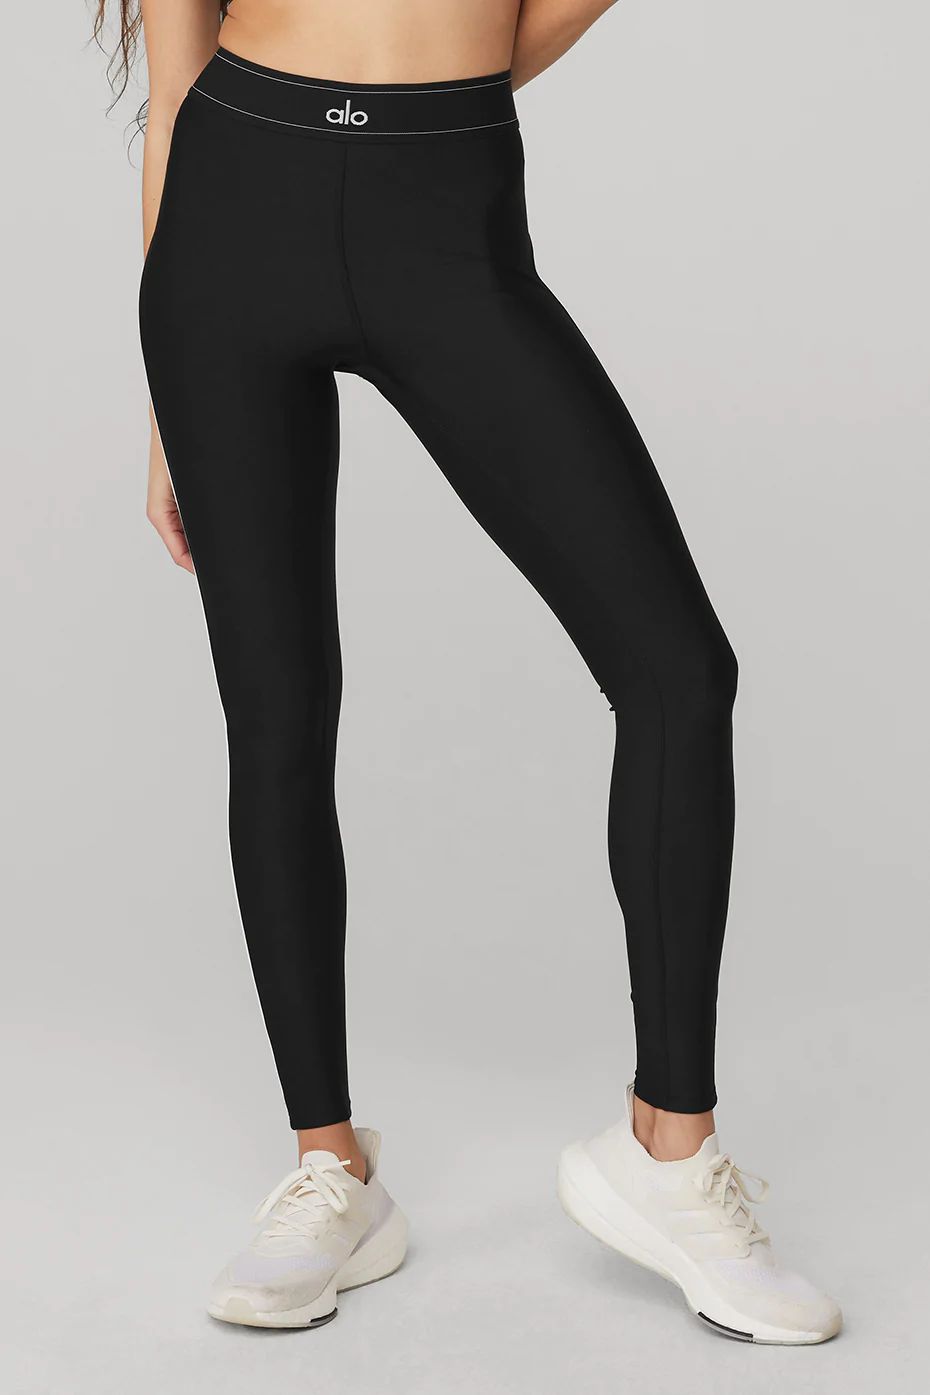 Alo YogaÂ® | Airlift High-Waist Suit Up Legging in Black, Size: 2XS | Alo Yoga